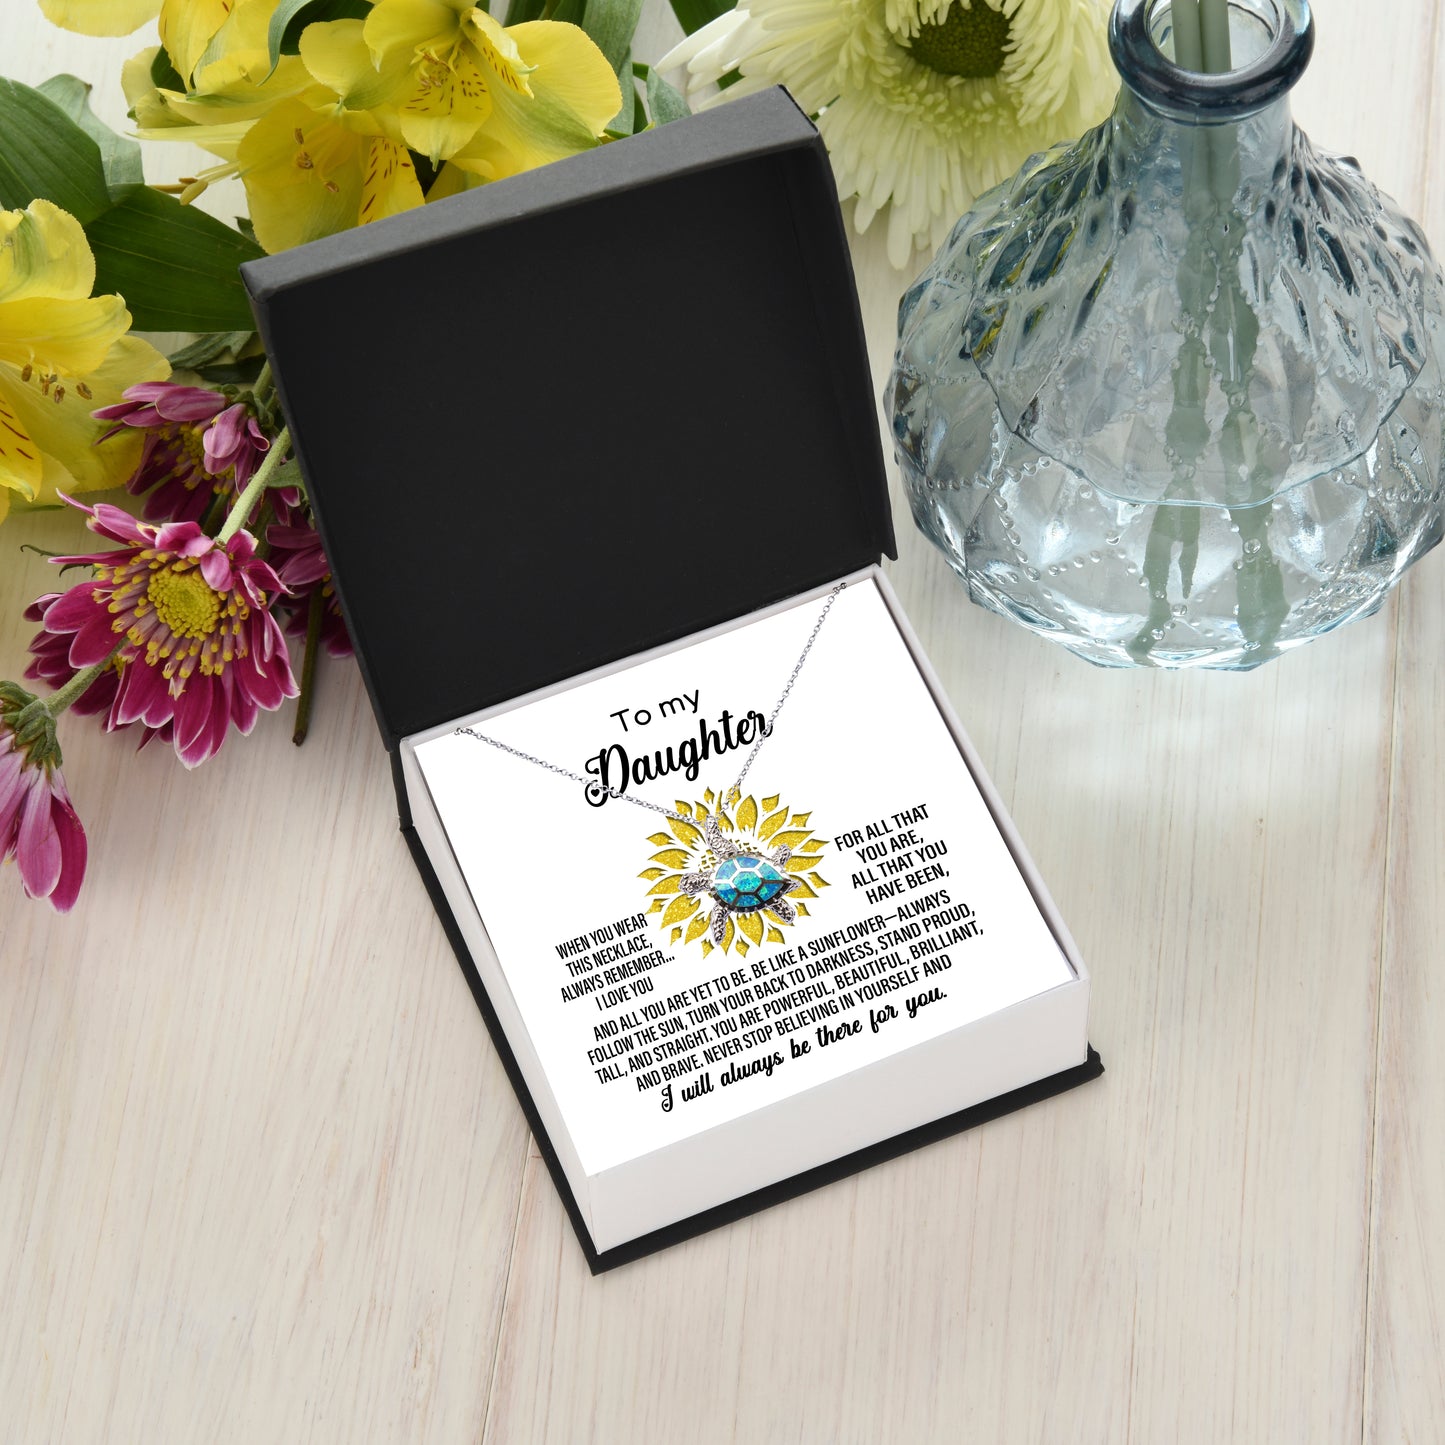 Daughter Never Stop Believing In Yourself Sunflower Pendant Necklace Birthday Graduation Holiday Gift